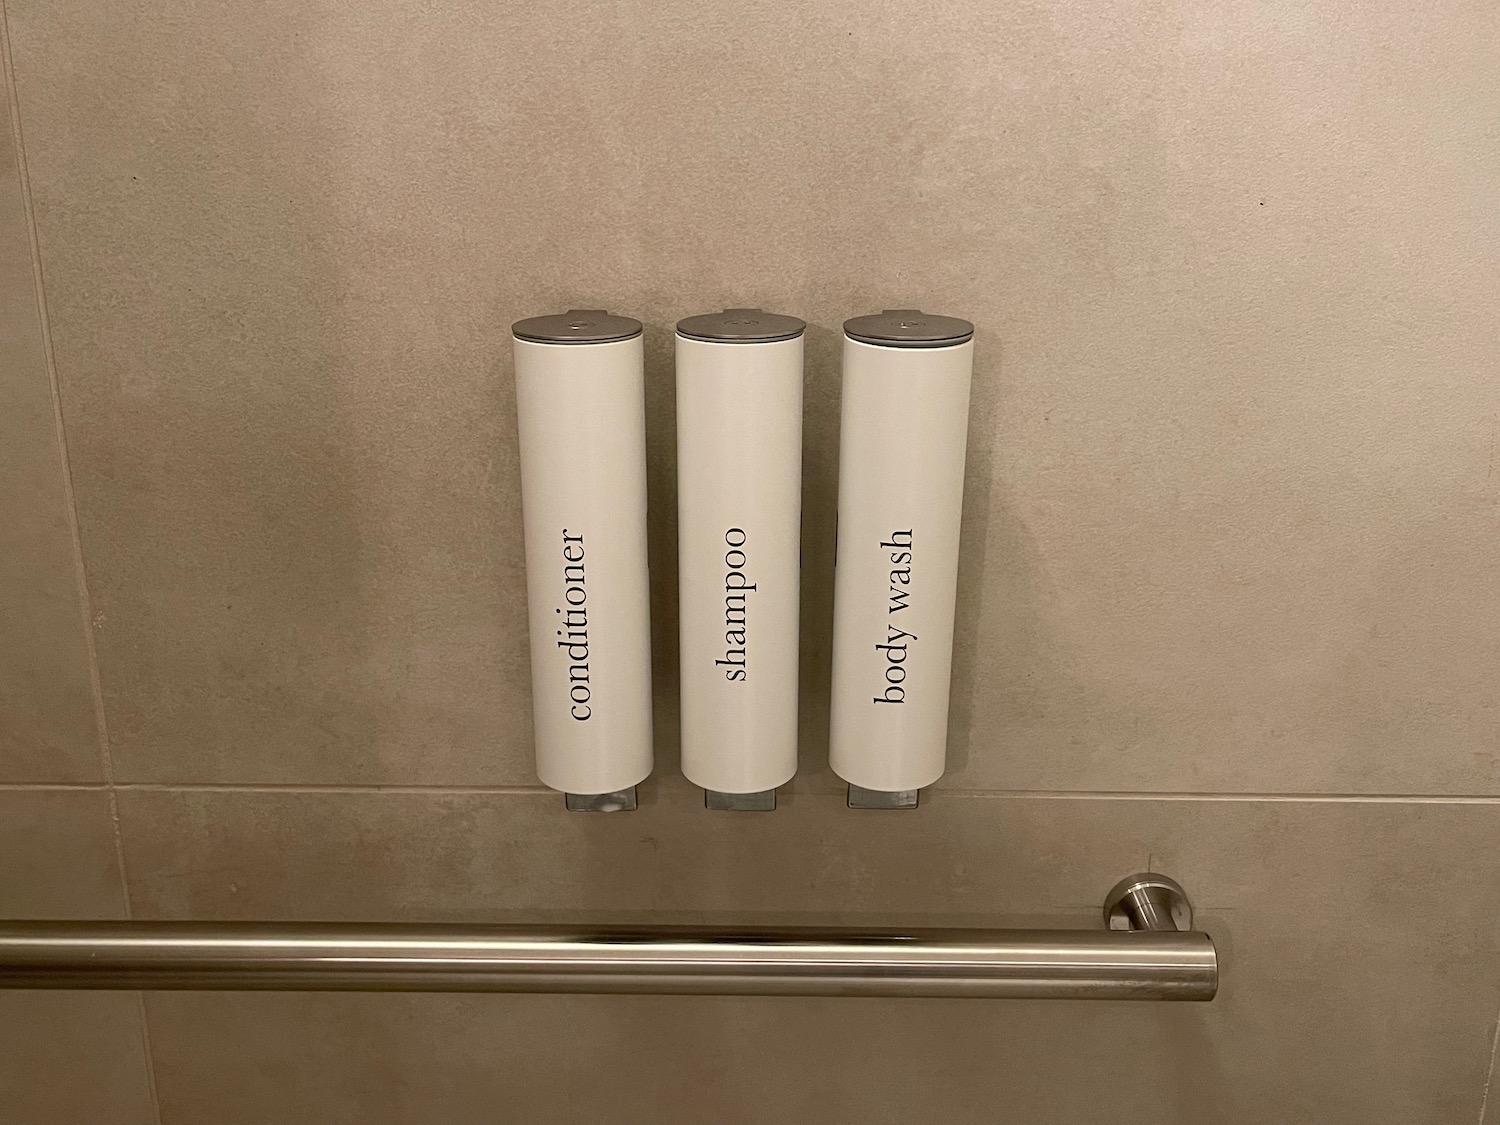 a group of white containers with black text on them